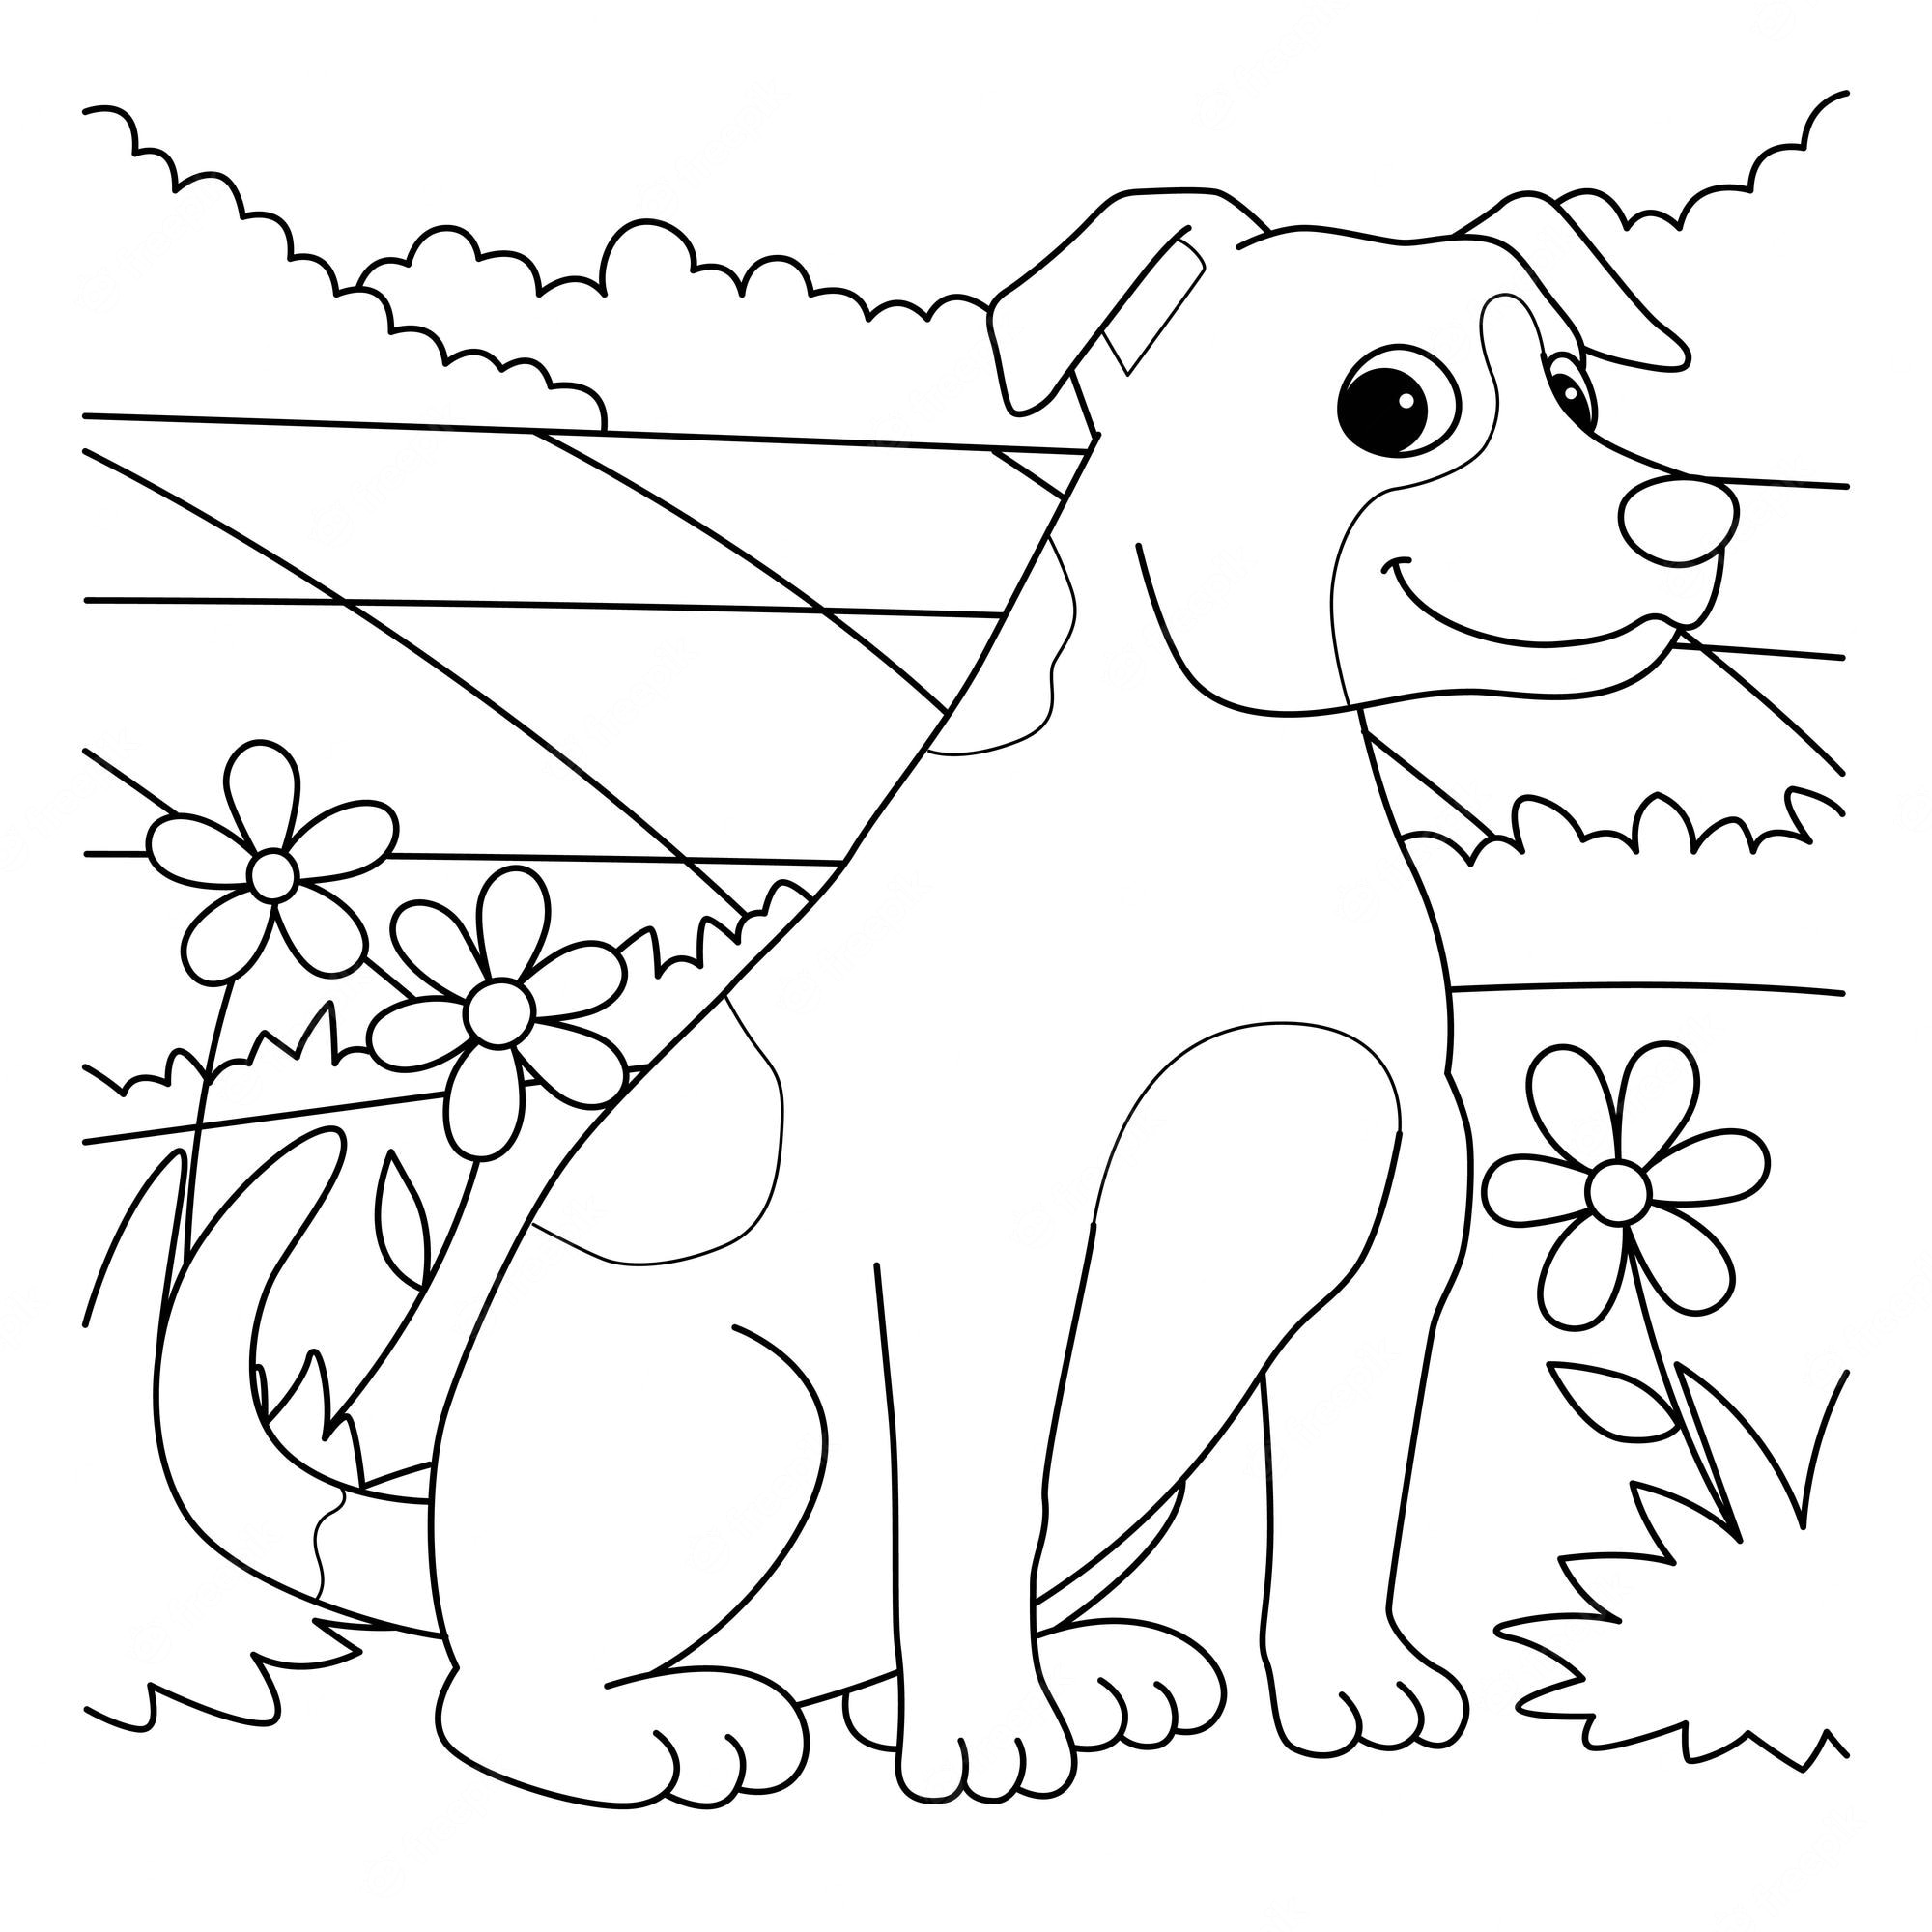 Premium Vector | Jack russell terrier dog coloring page for kids